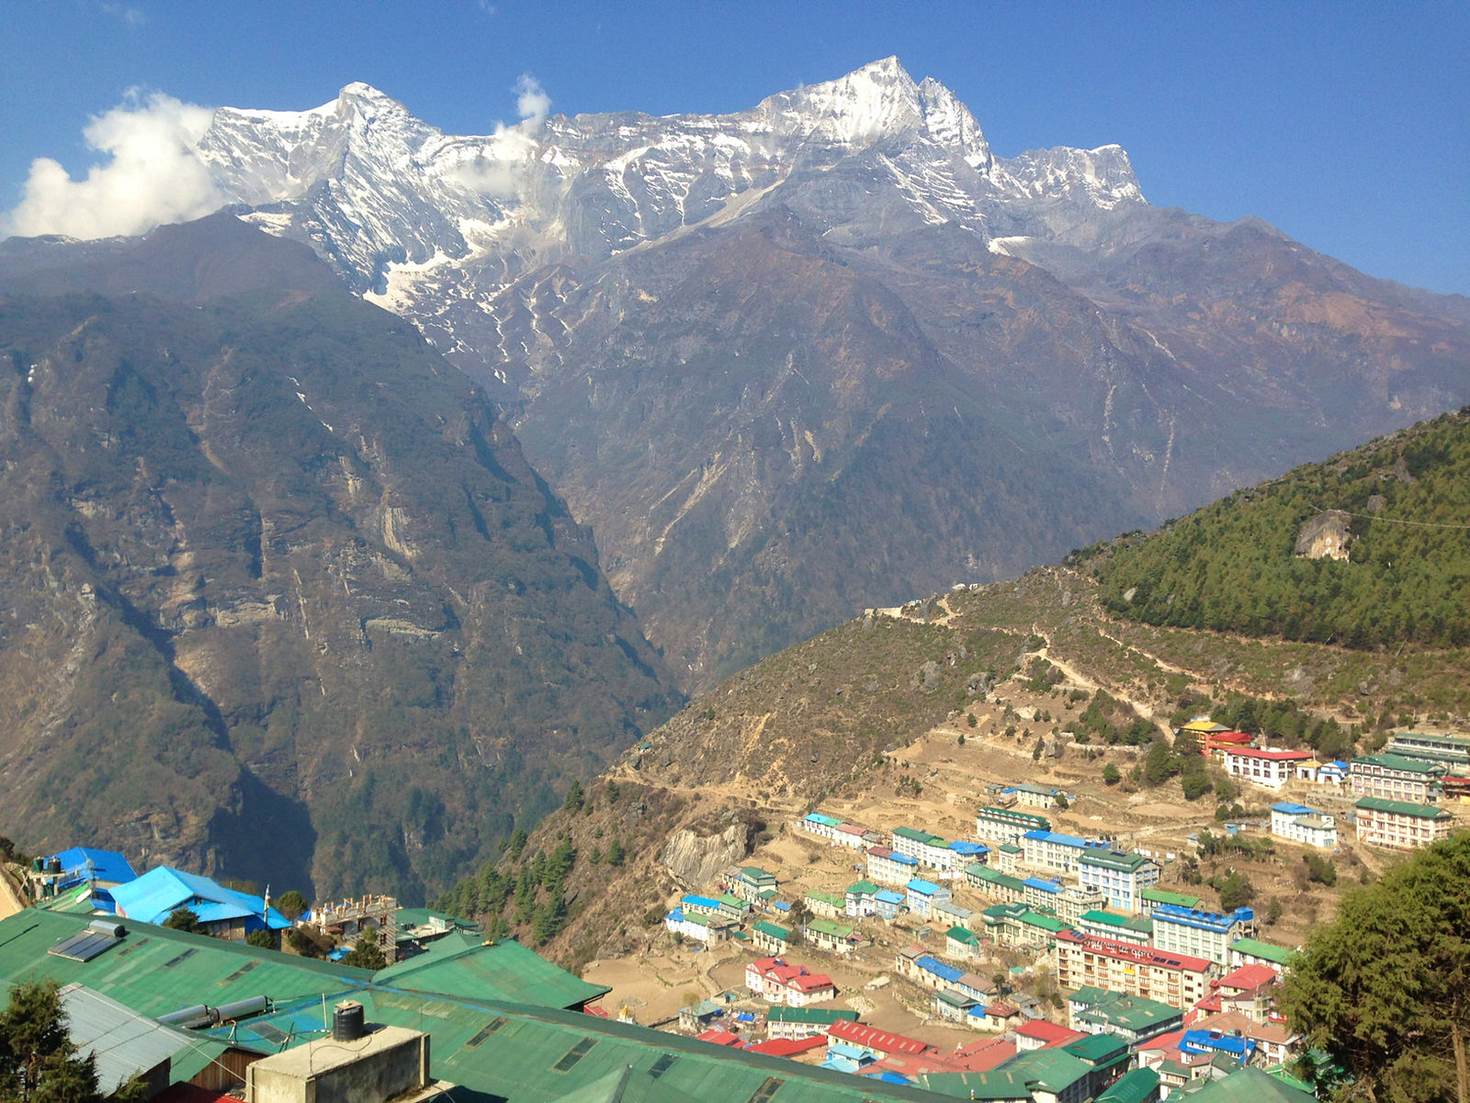 Snowpeaks rising over the rooftops of Namche Bazaar Â© Anna Kaminski / Lonely Planet